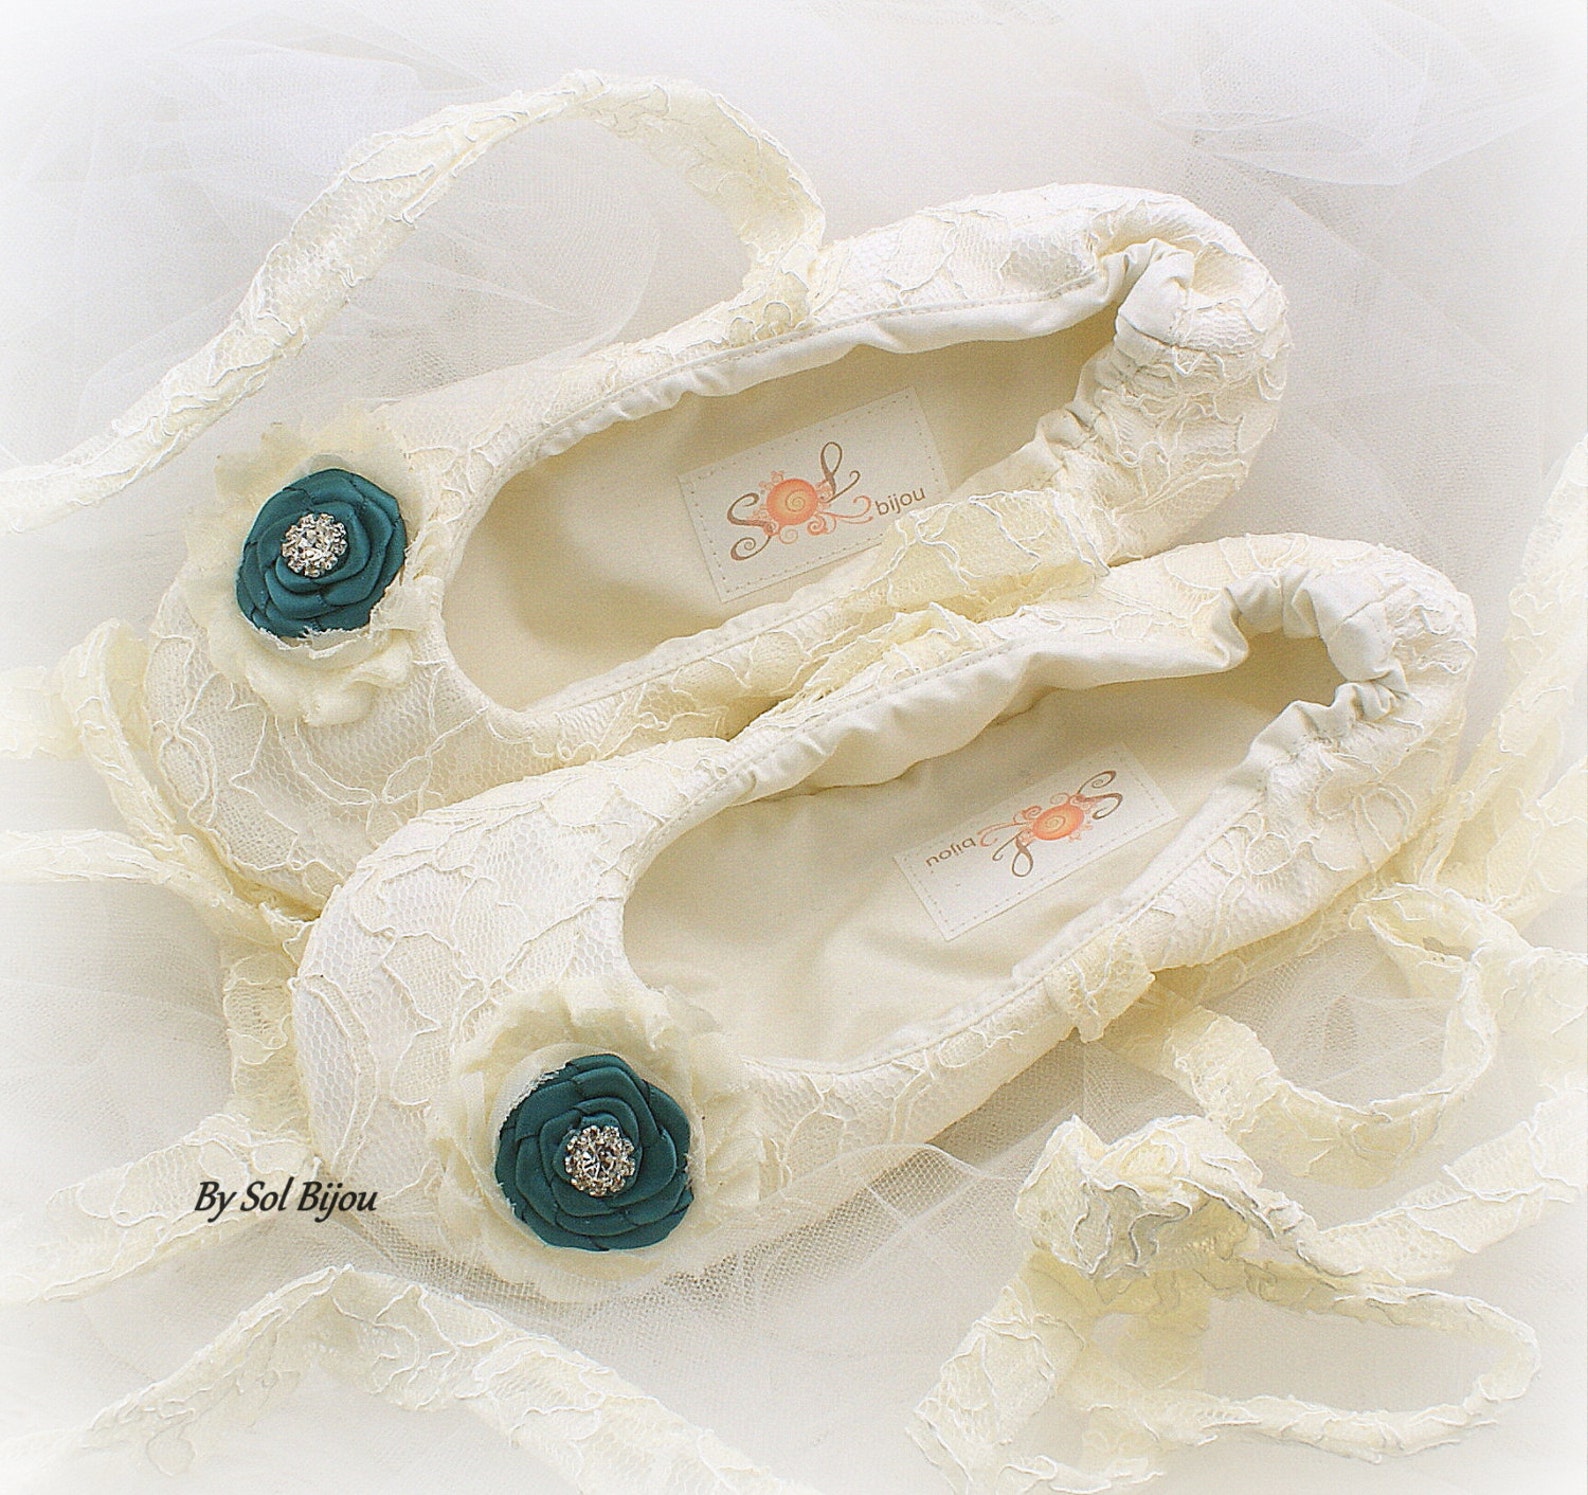 ballet flats, ivory, teal, bridal flats, wedding shoes, flats, lace up, ballerina slippers, flower girl, crystals, lace, vintage